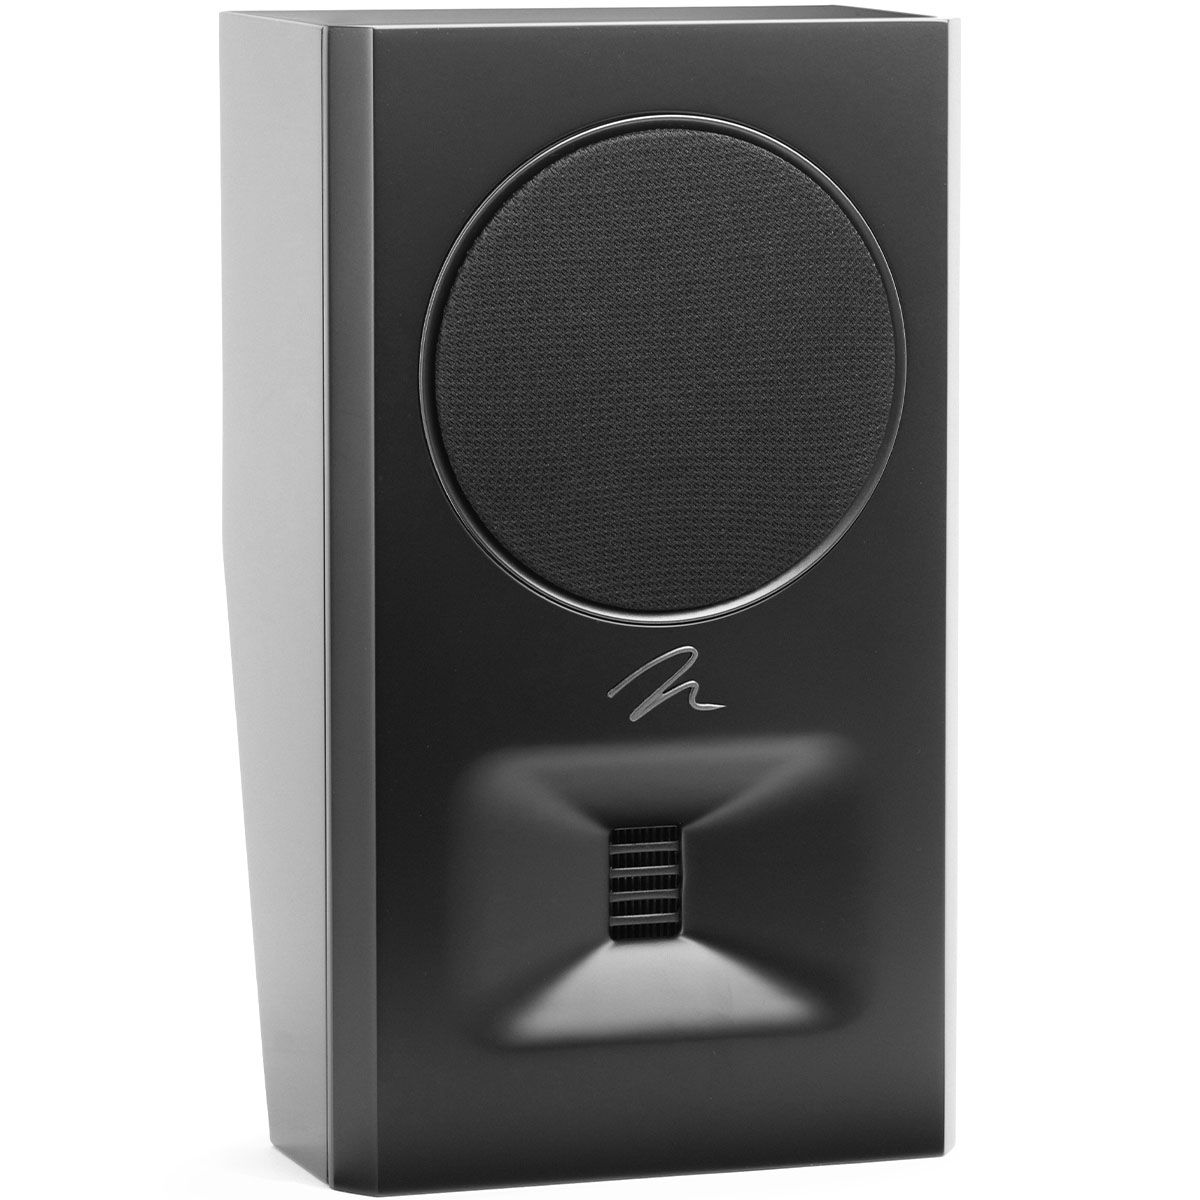 MartinLogan Motion XT MP10 on-wall Speaker in black, angled view with grilles on white background